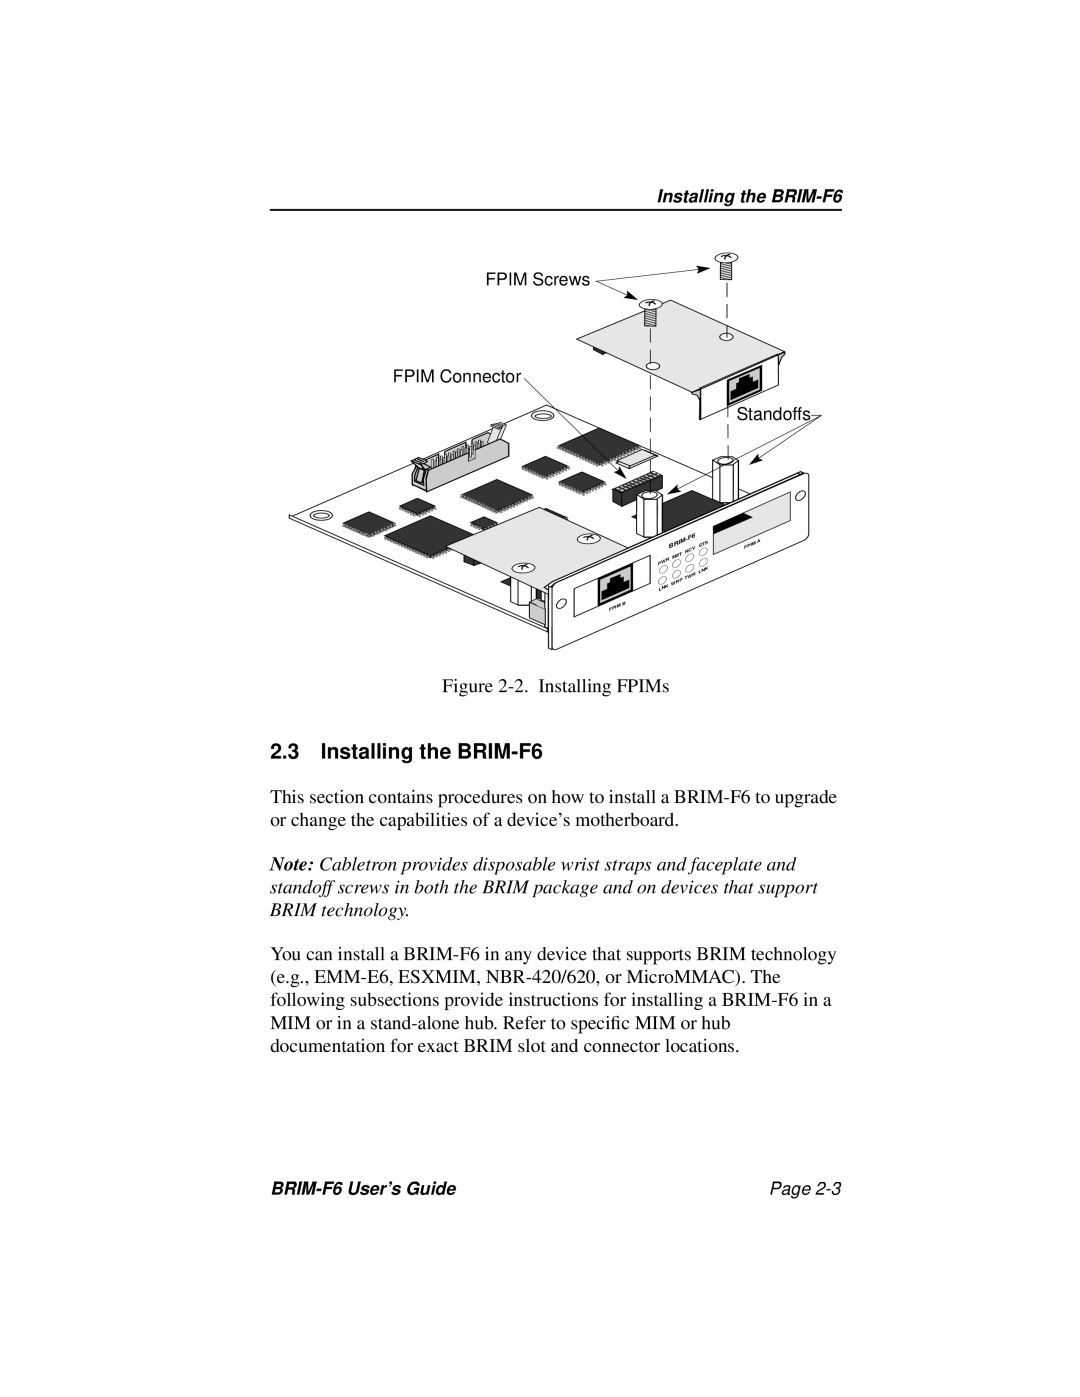 Cabletron Systems manual Installing the BRIM-F6 